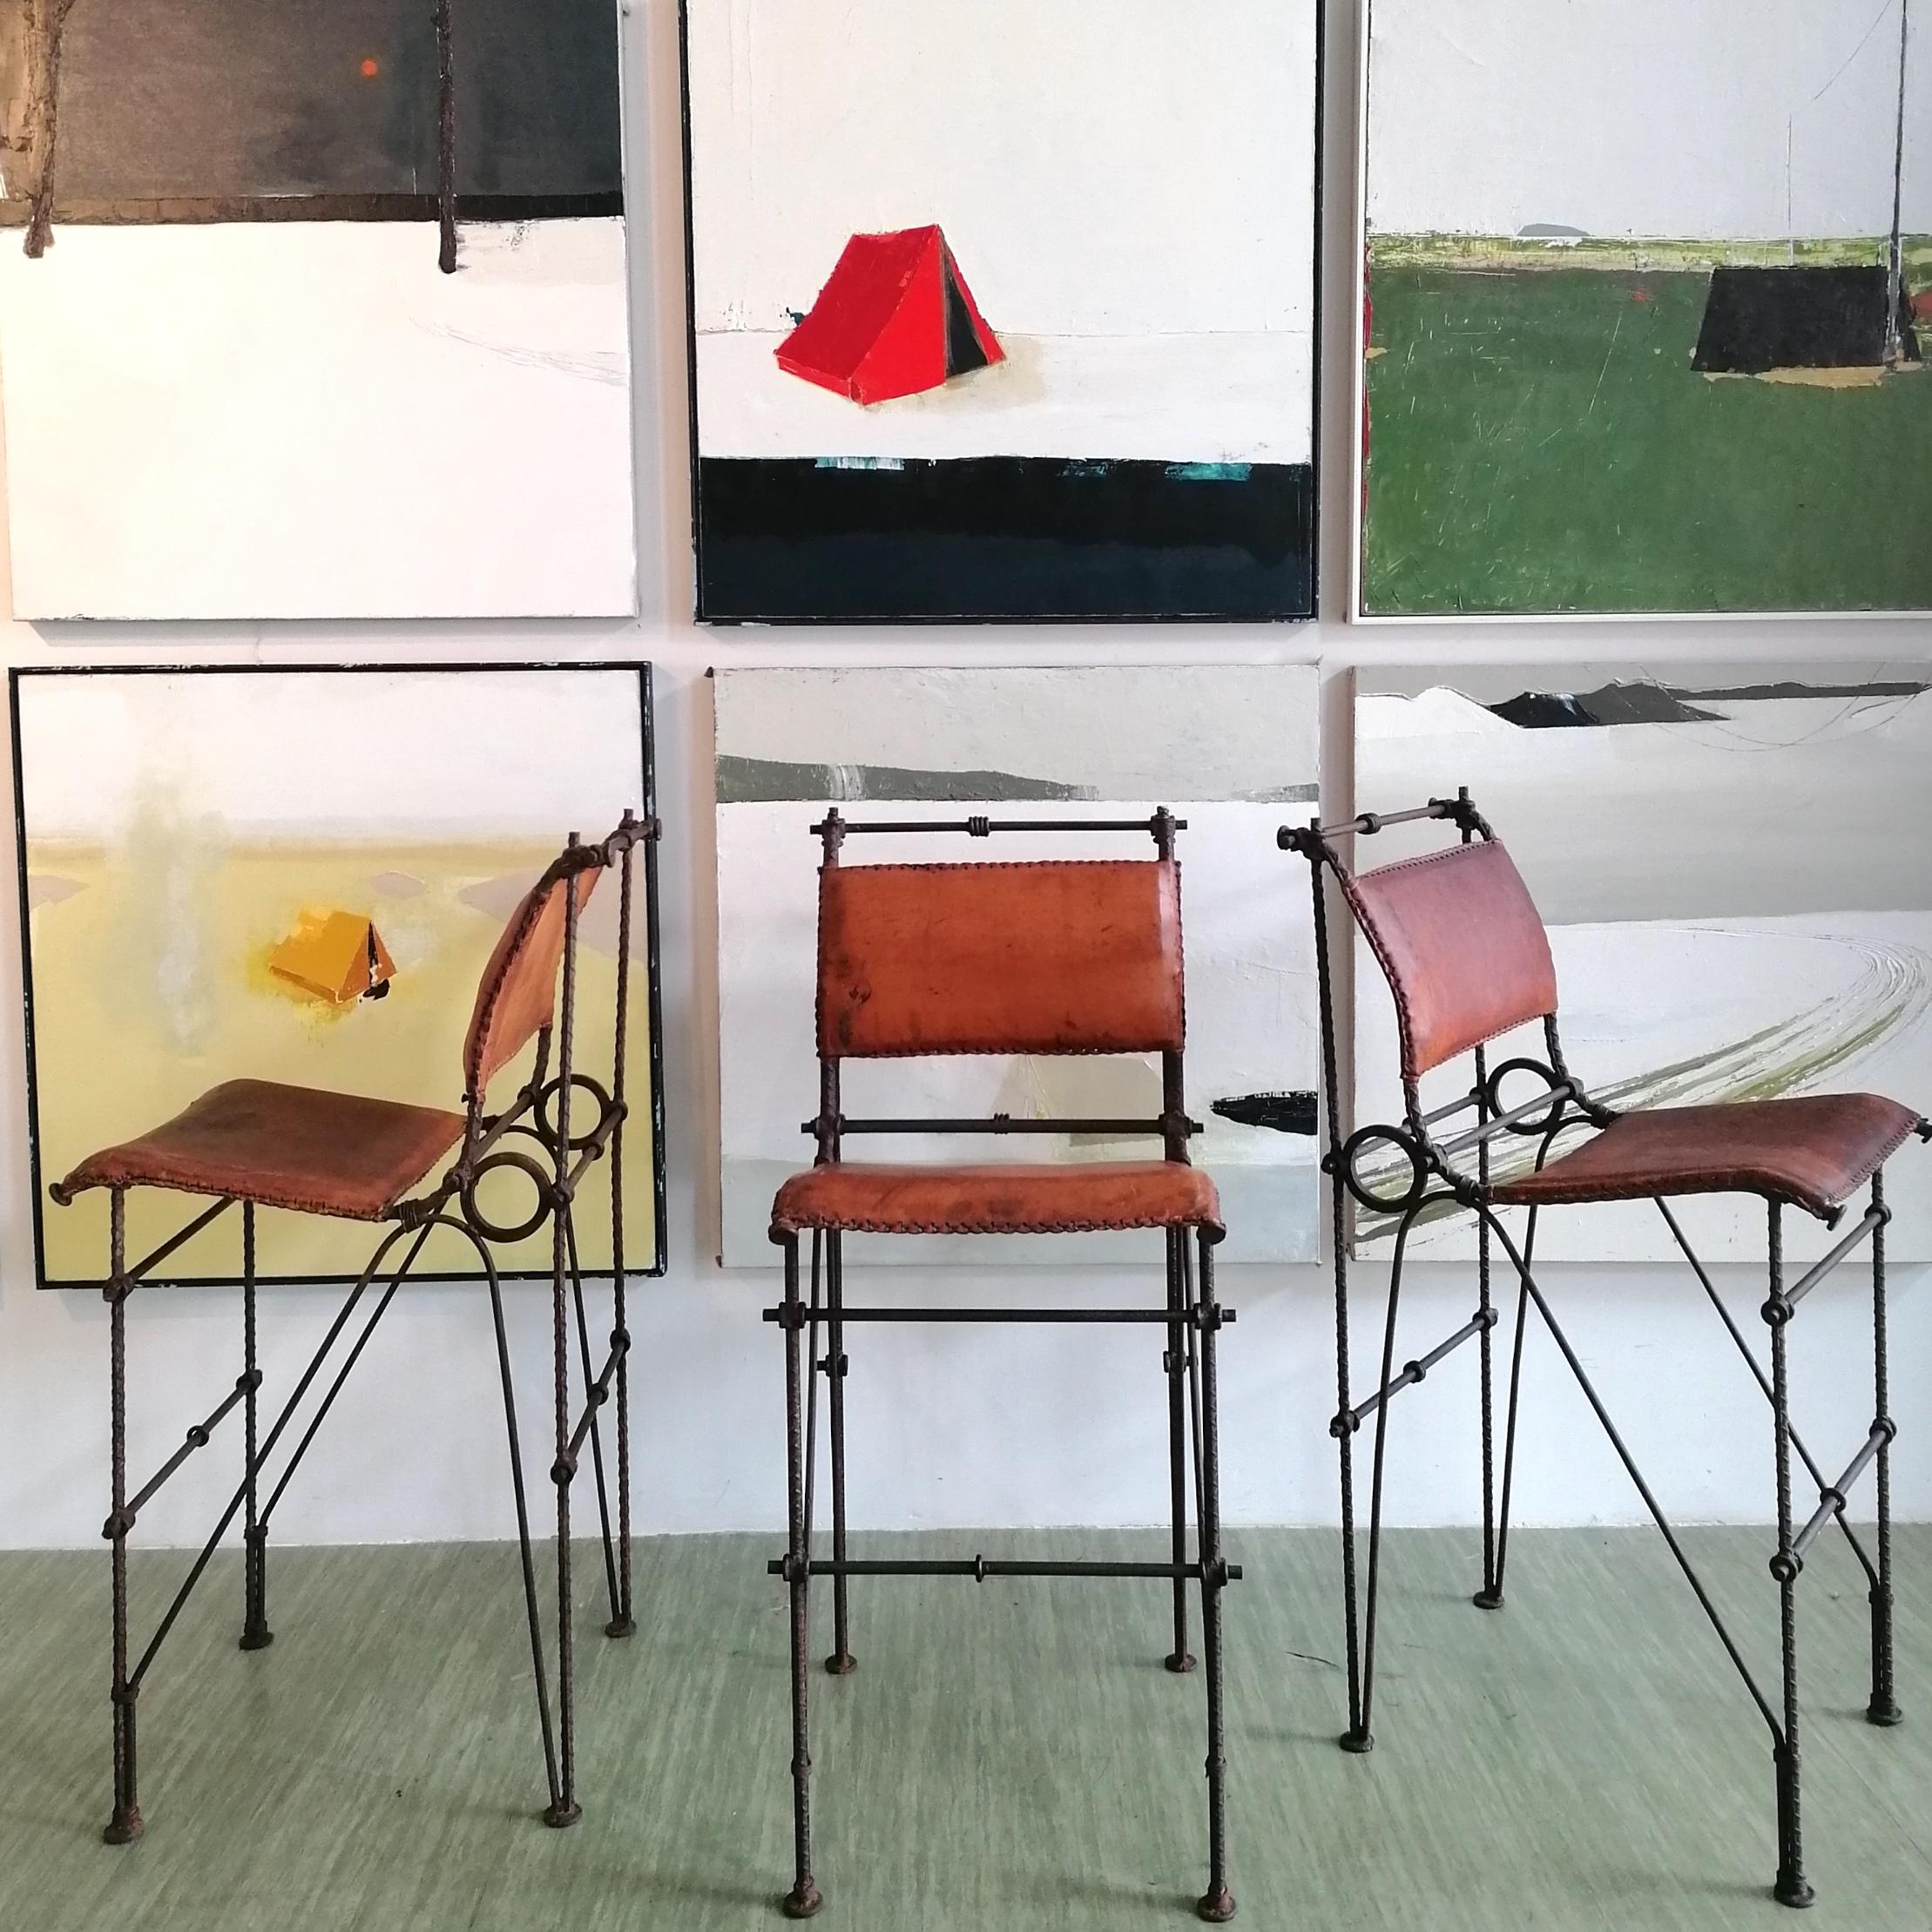 Brutalist iron & hide leather bar stools by Ilana Goor, 1970s. Handmade Rebar iron and steel frame, with beautifully patinated thick whipstitched hide leather seats & backs
Three available: you will be able to select your choice of stool(s). Please